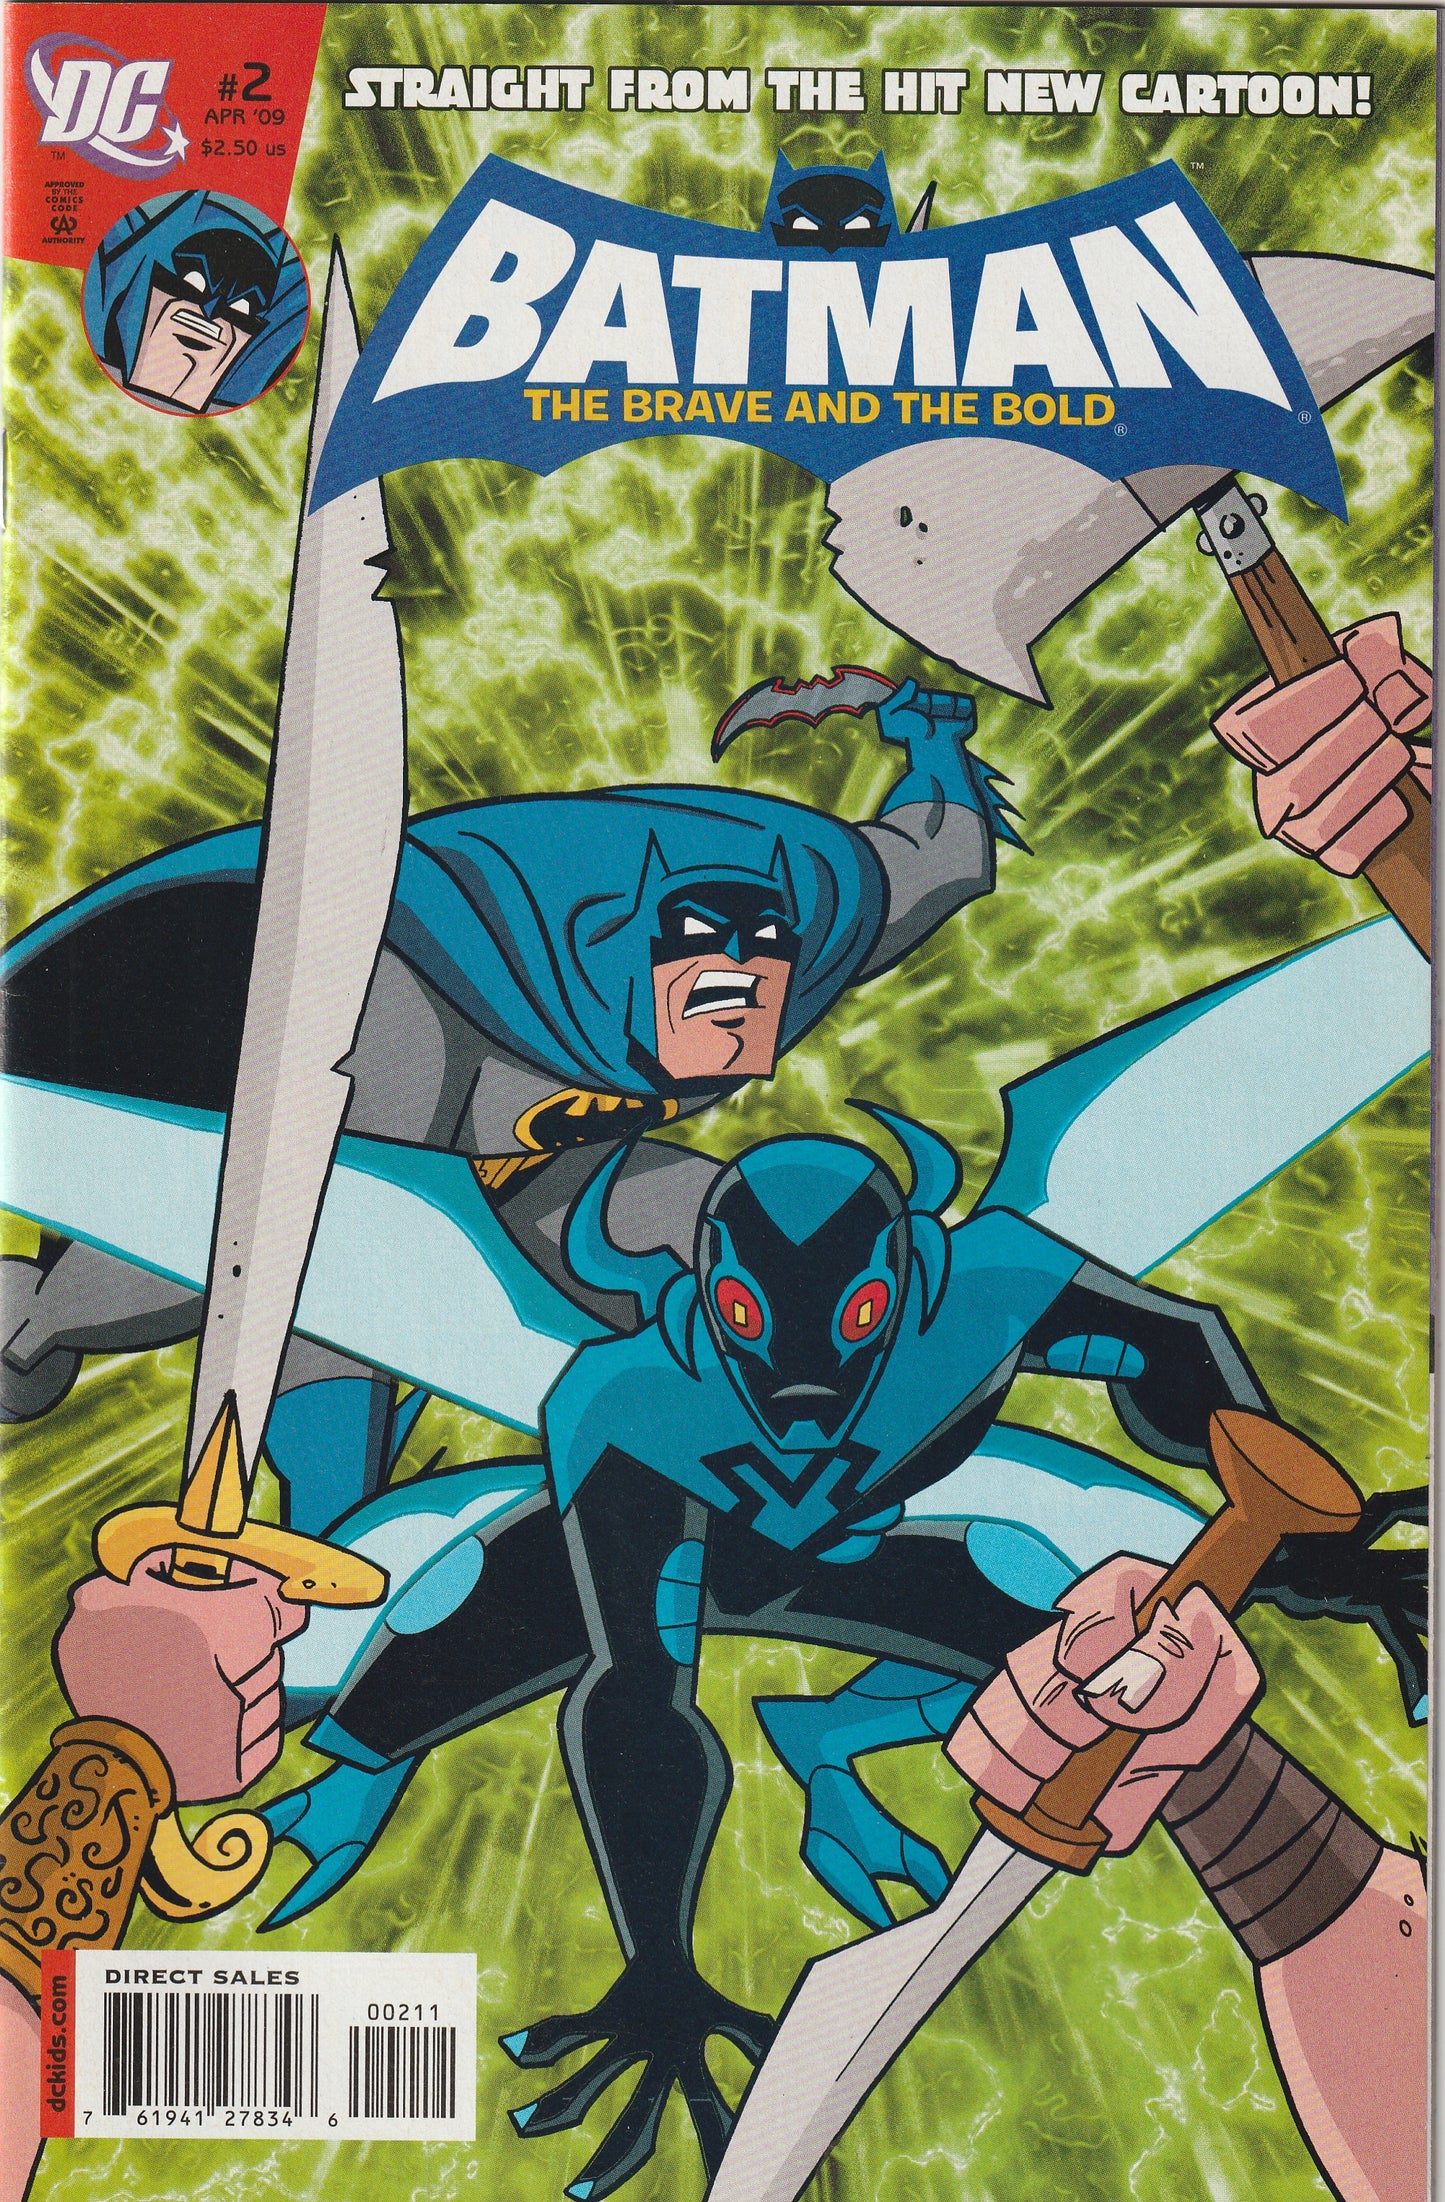 Batman: The Brave and the Bold #2 (2009)